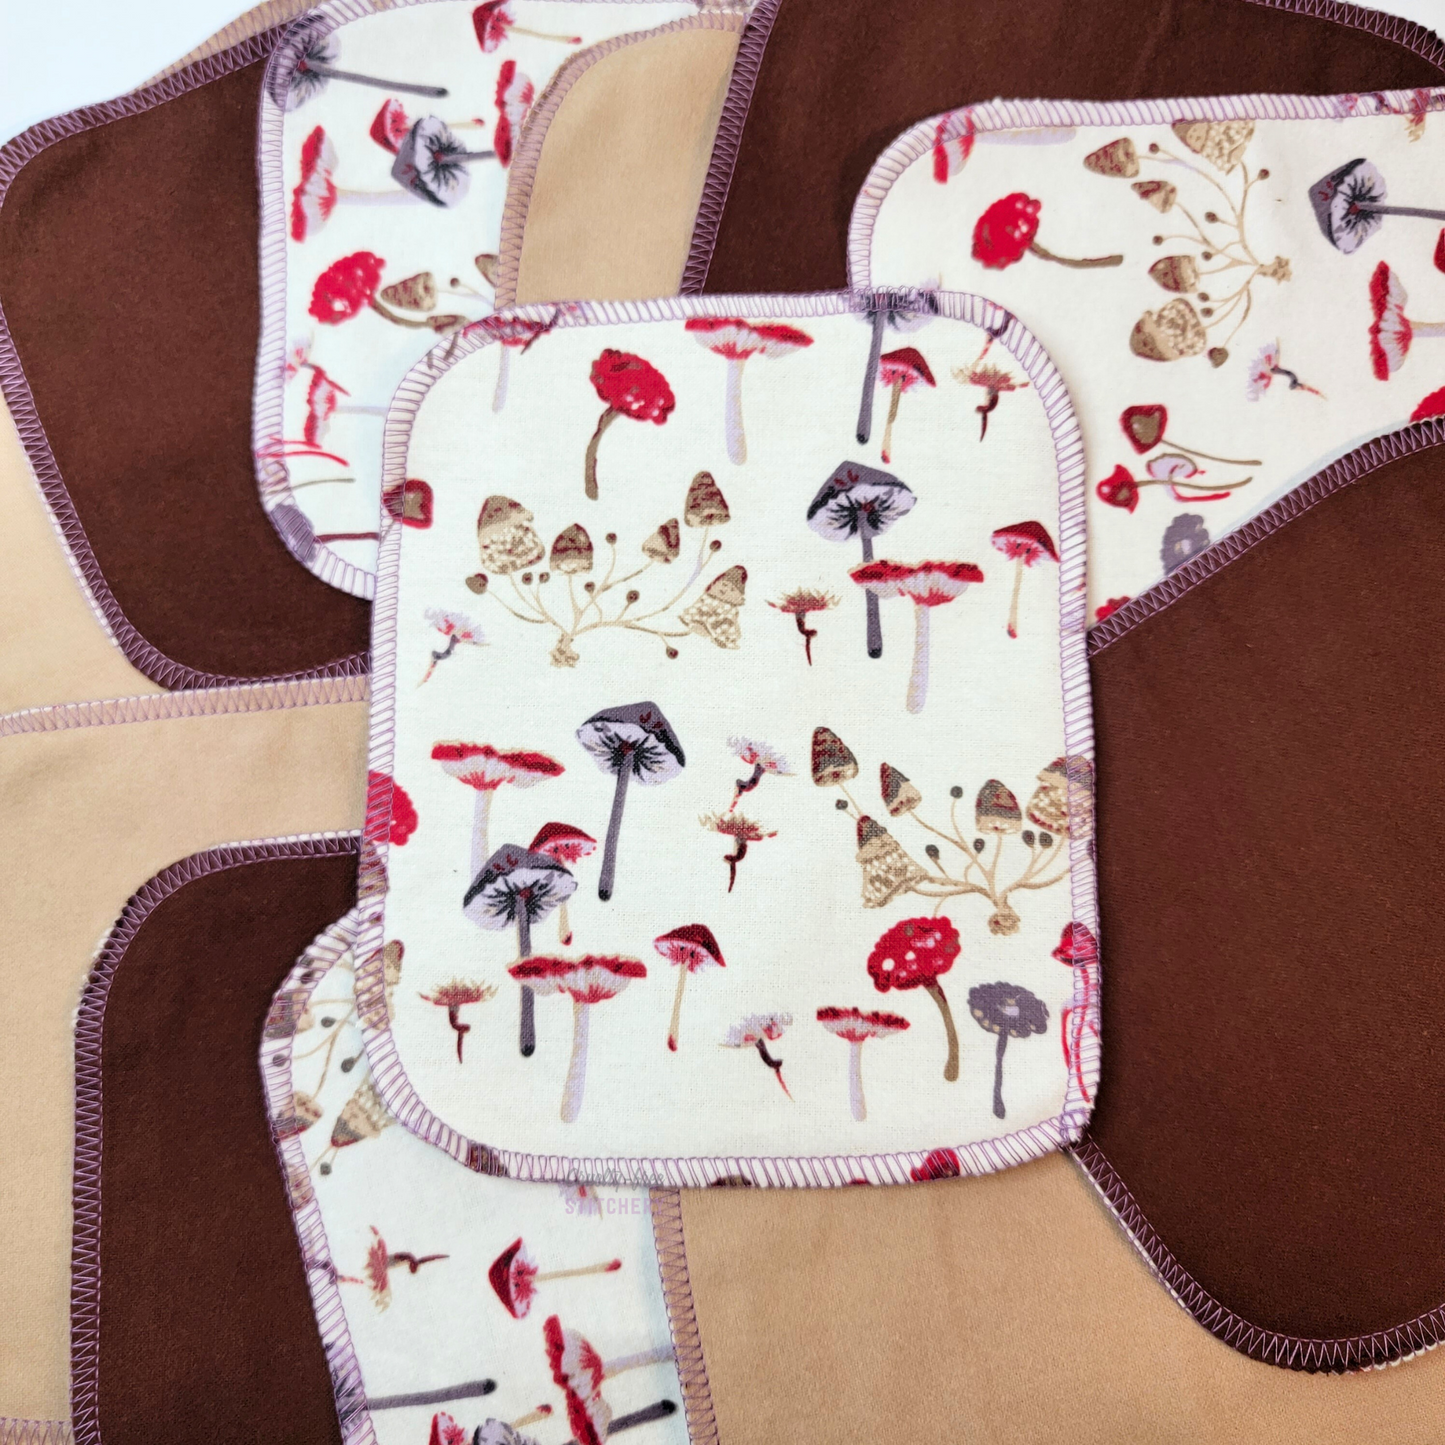 Several mushrooms print cloth wipes scattered on the table, some upside down to show the brown shades on the back, and one in the center showing the full mushrooms print.